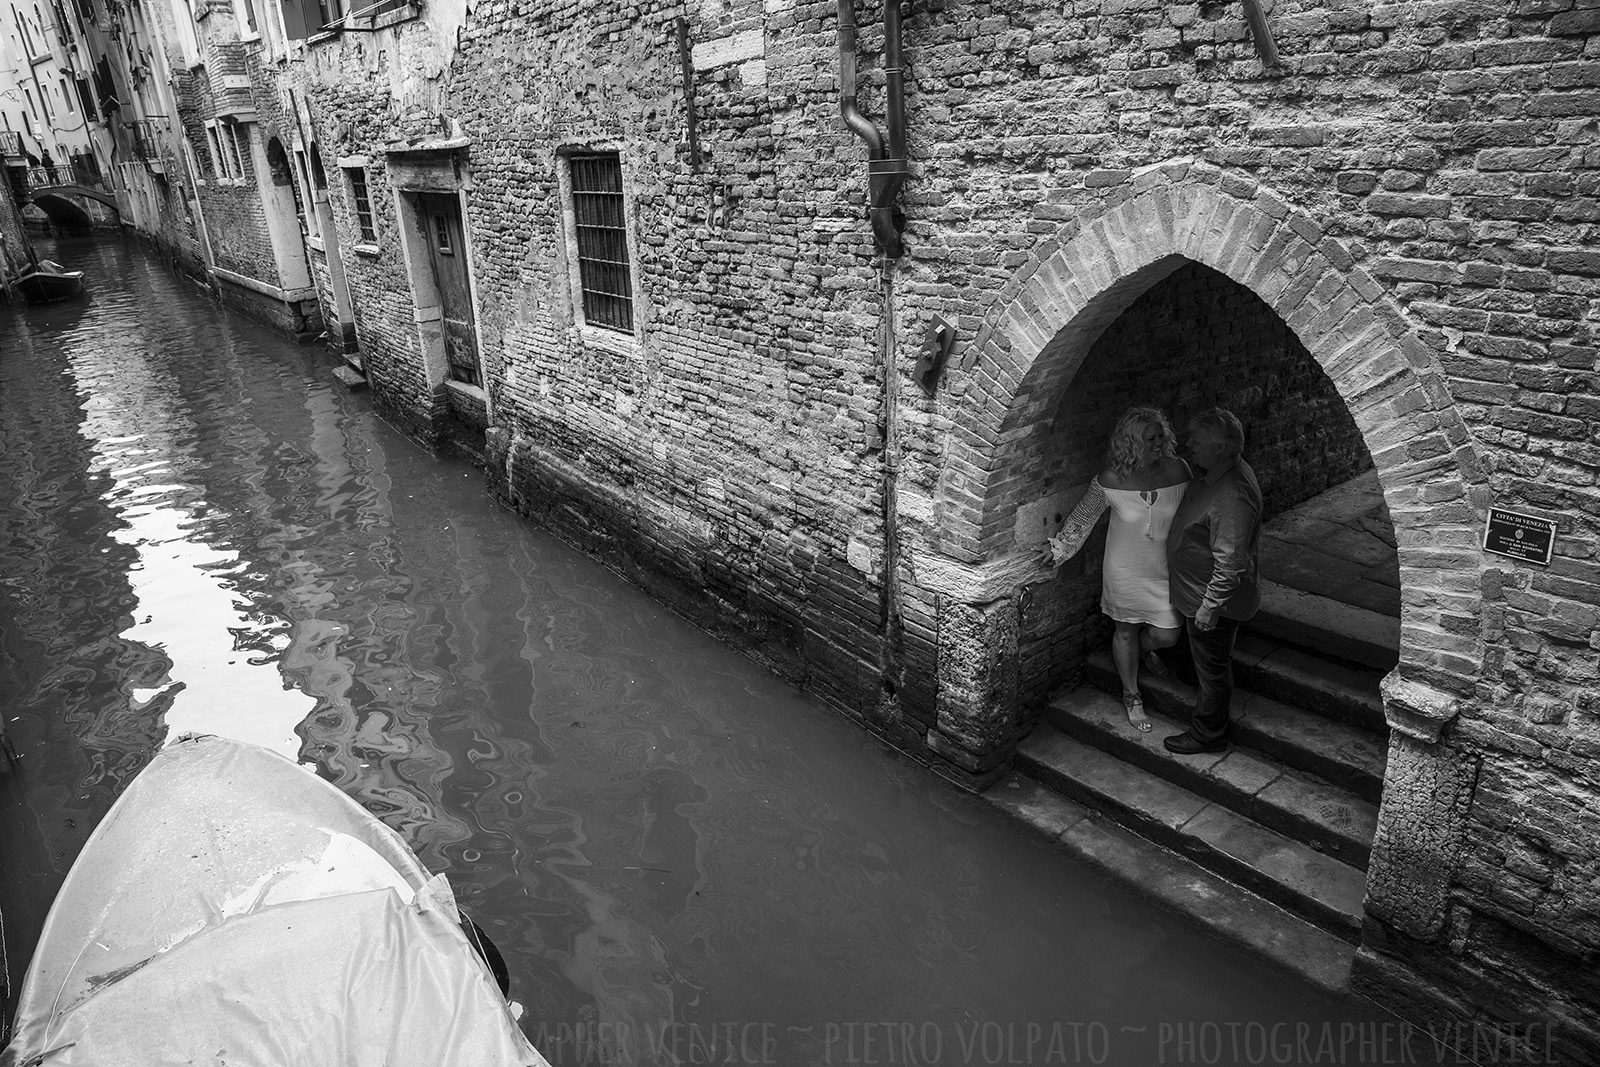 Photography session with photographer in Venice ~ Romantic and fun honeymoon photo shoot in Venice ~ Venice photo walk